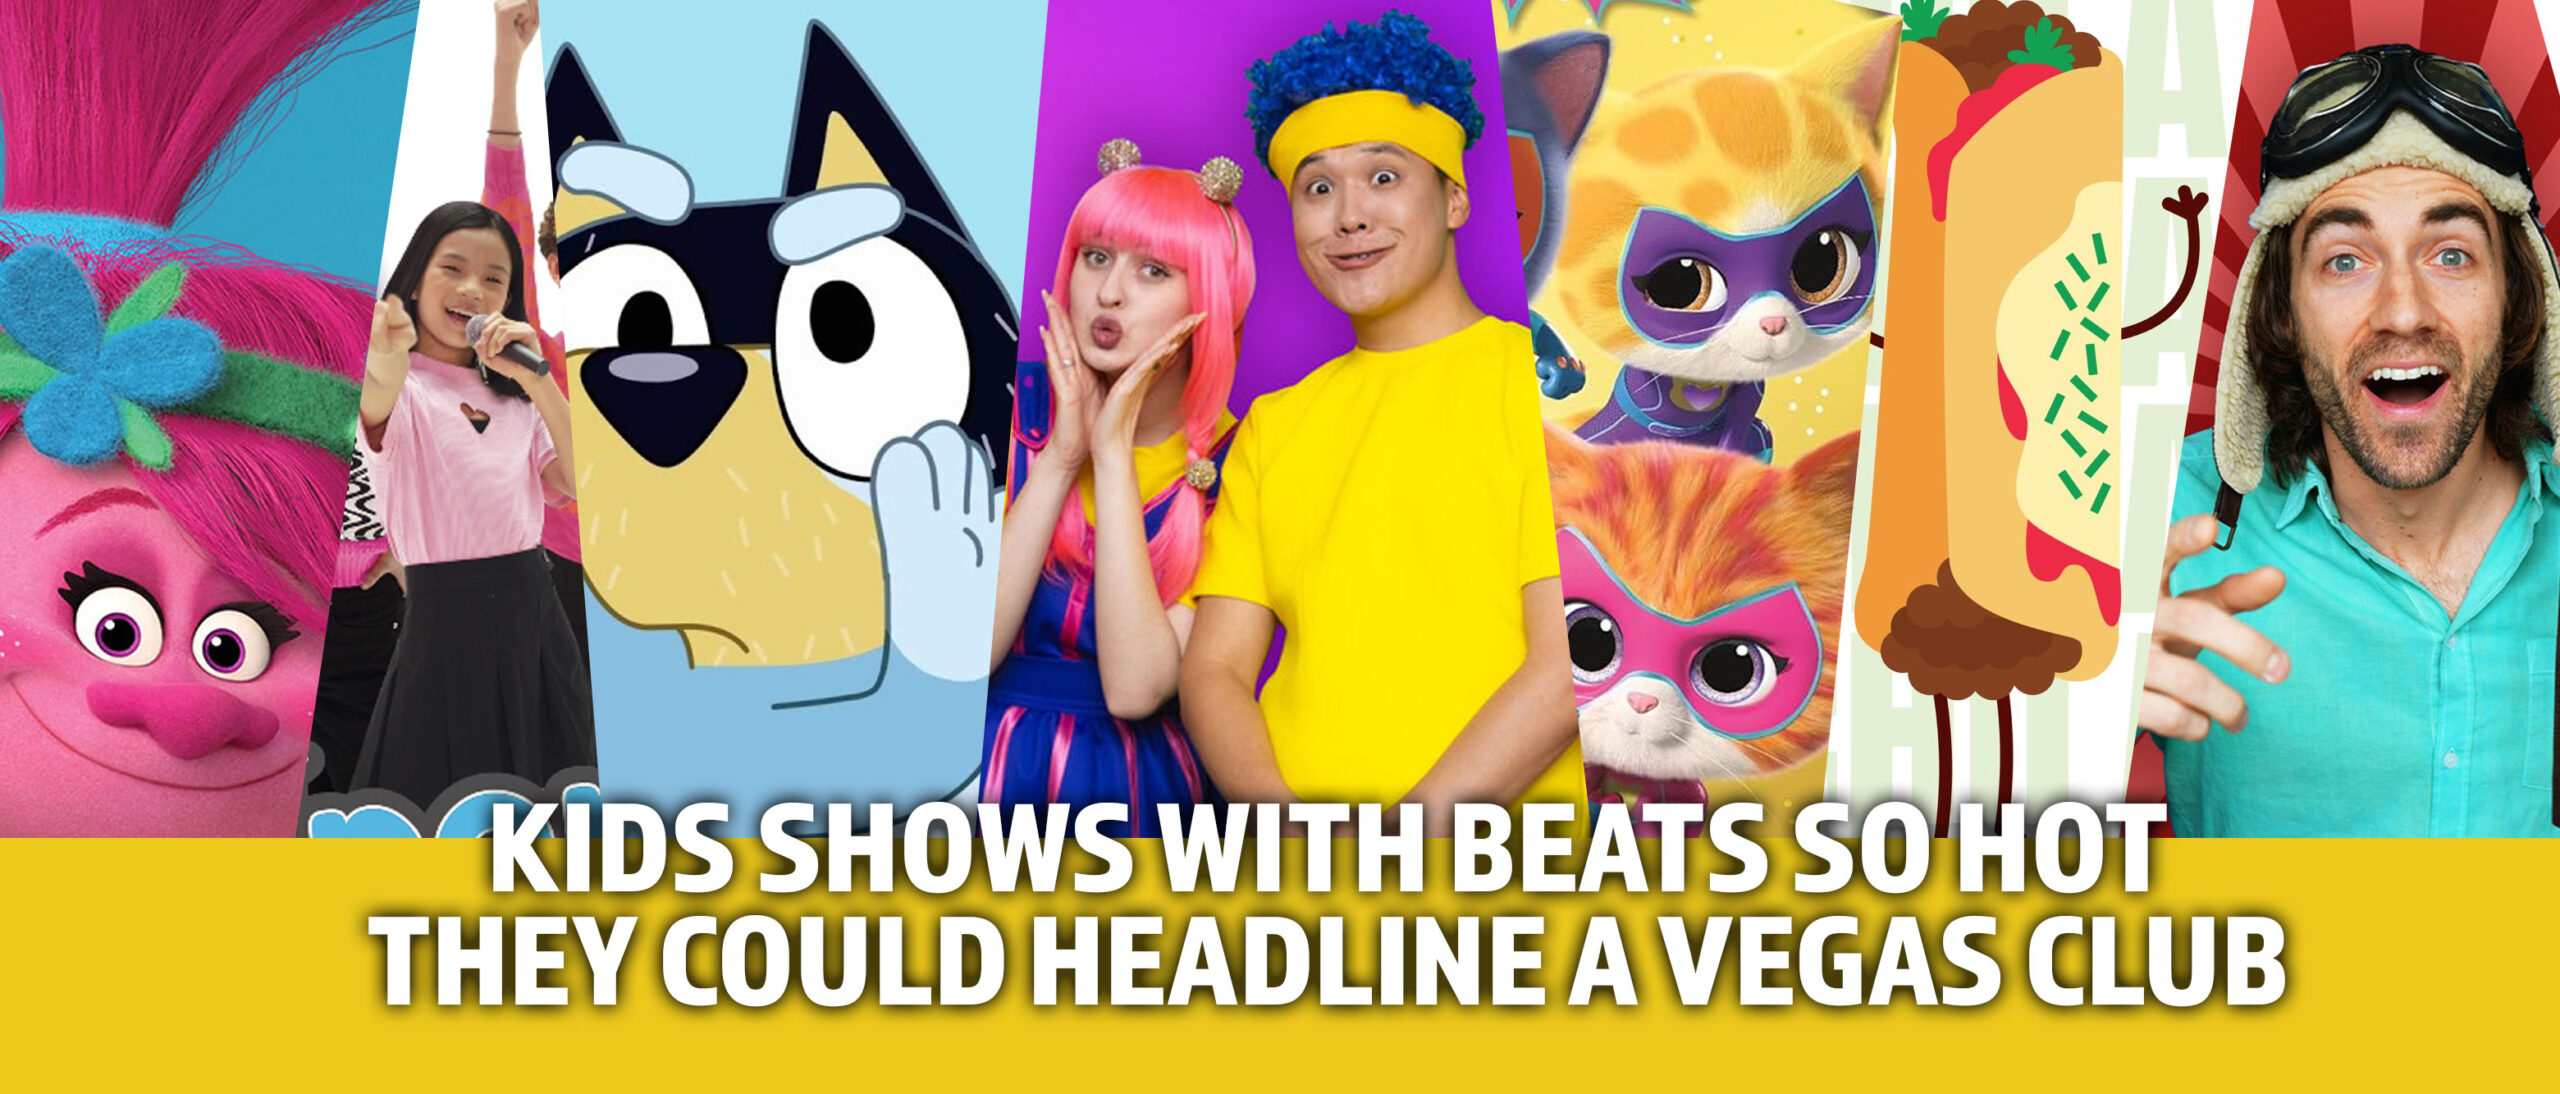 Kids Shows With BeatS So Hot
They Could Headline A Vegas Club